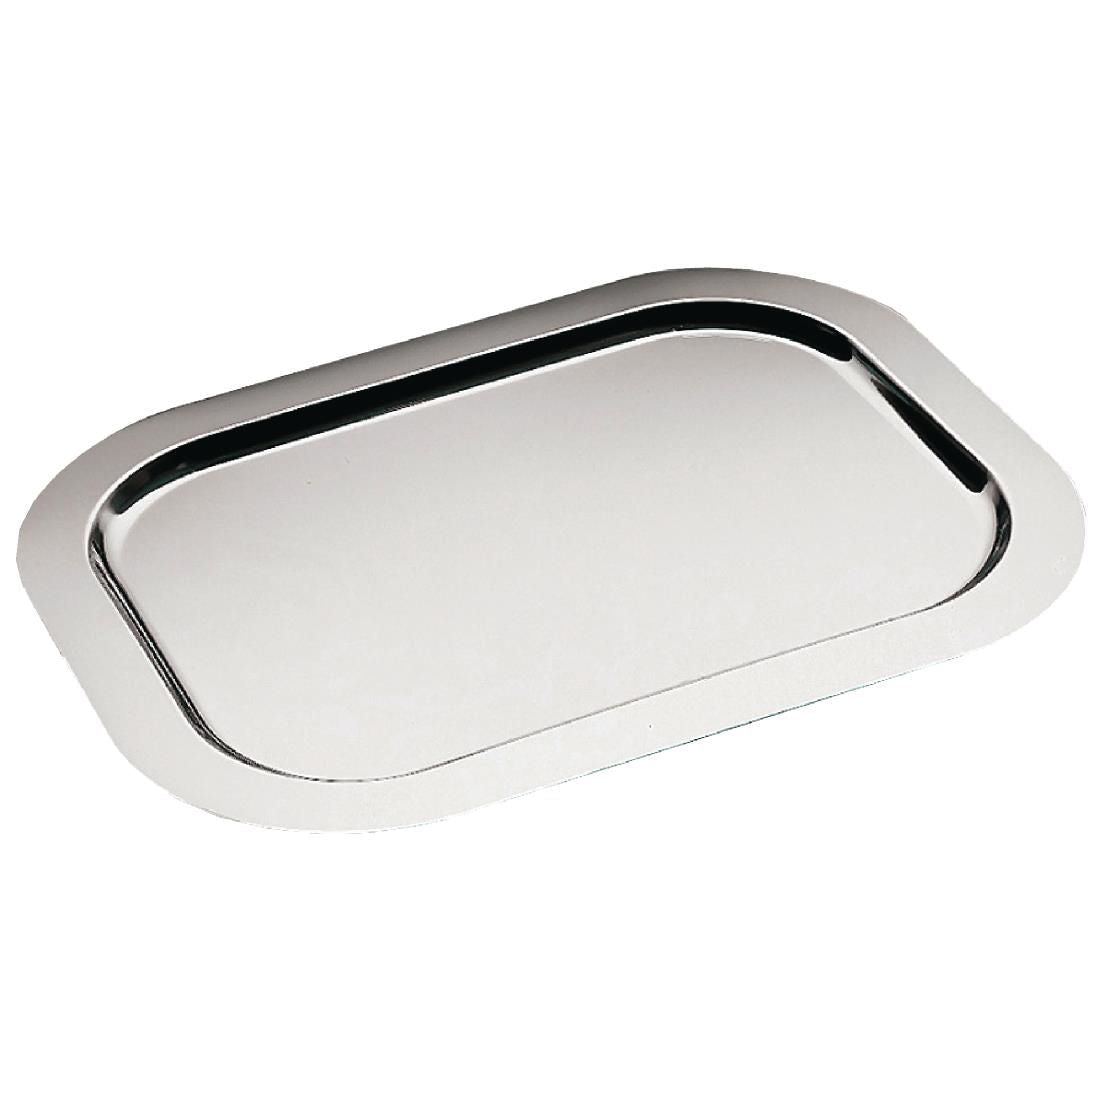 APS Small Stainless Steel Service Tray 480mm JD Catering Equipment Solutions Ltd